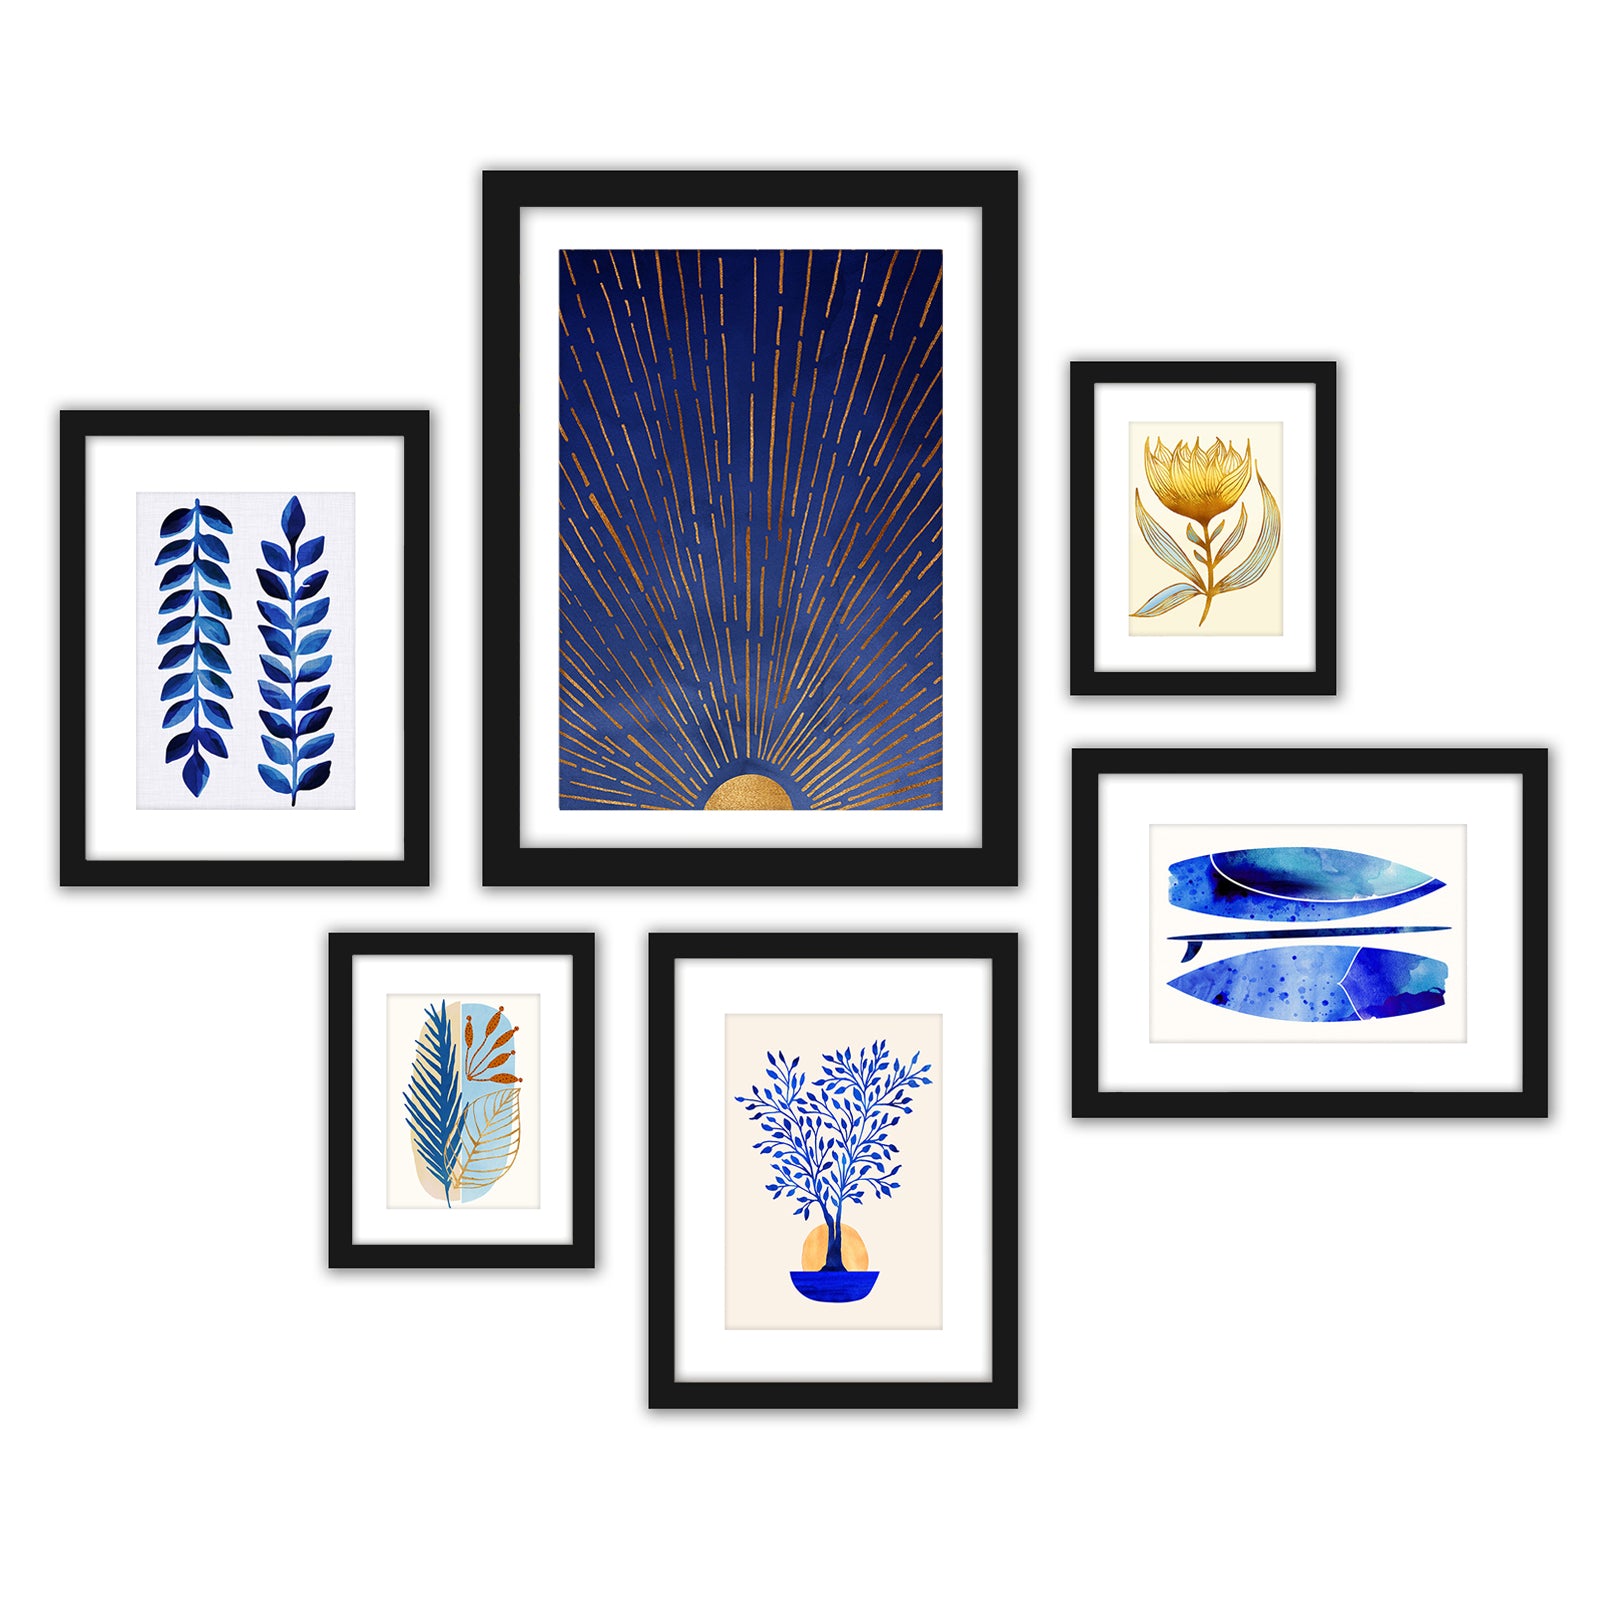 Black and White Contemporary Blue-Grey - 6 Piece Framed Gallery Wall Set Multi / White Matted - Americanflat